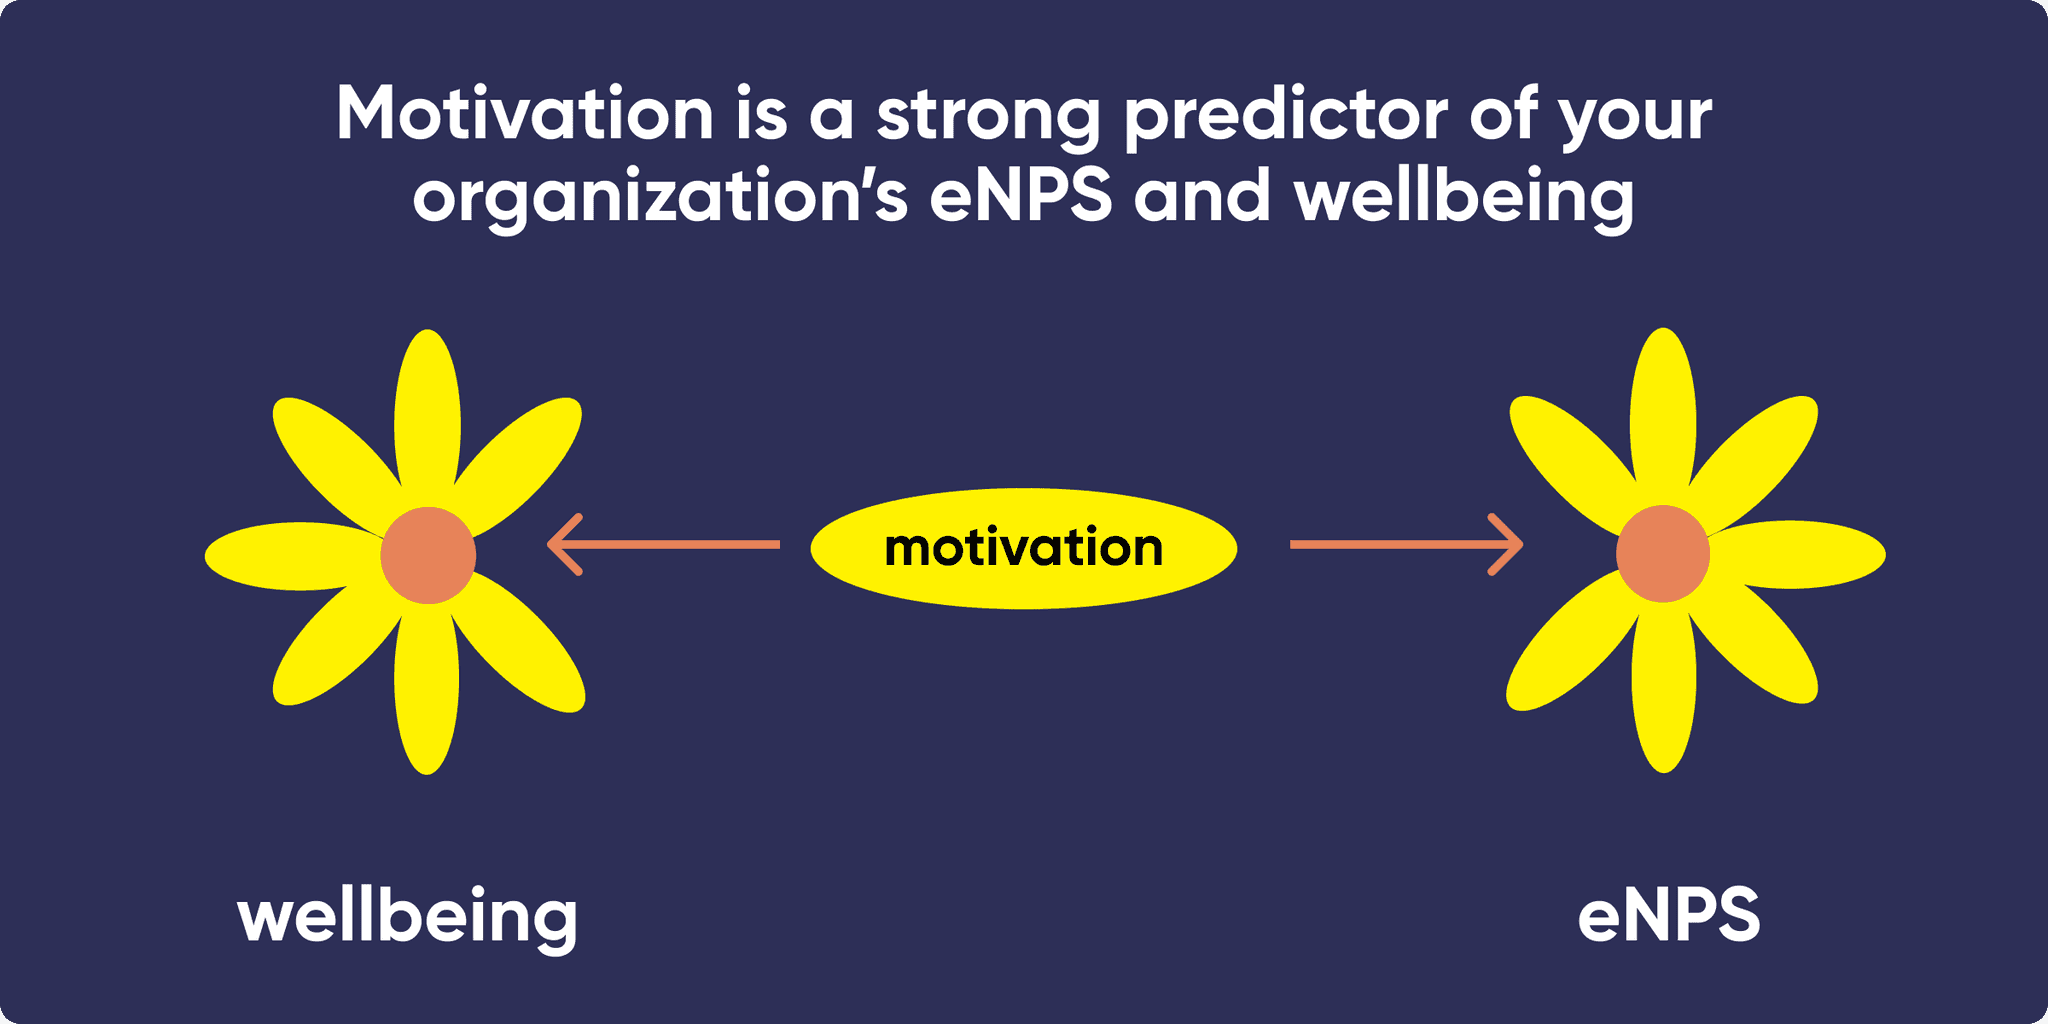 Motivation is a strong predictor of employee wellbeing and eNPS